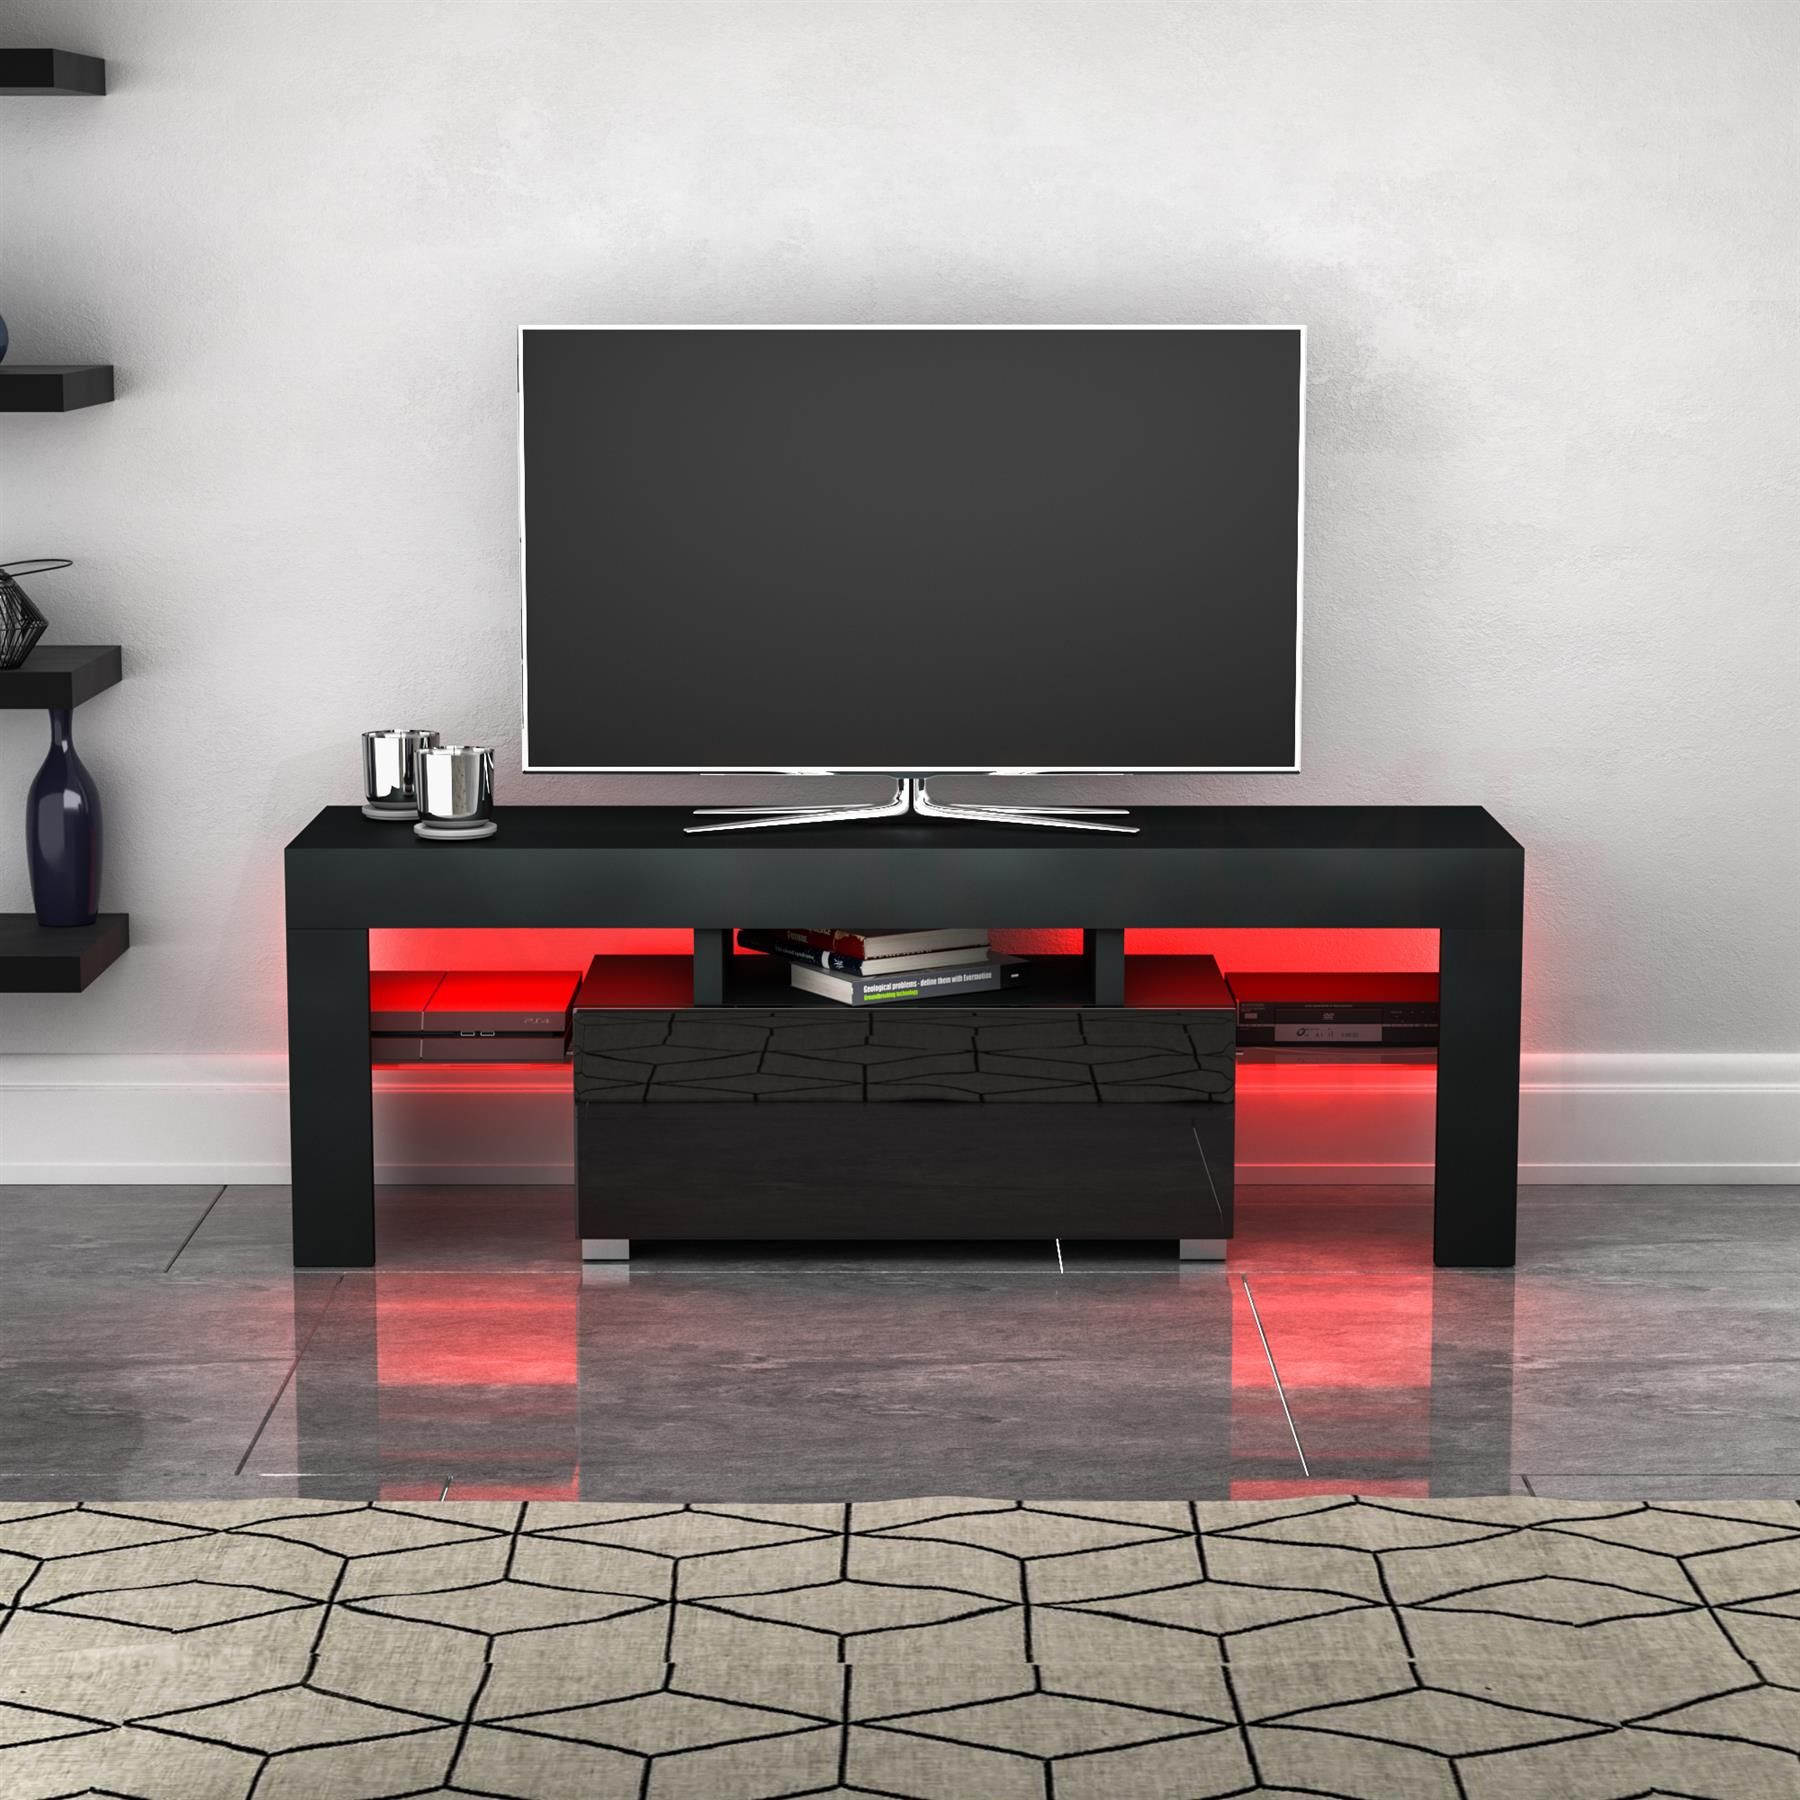 Luna Led Tv Stand Cabinet Unit 1 Drawer Modern Pertaining To Zimtown Modern Tv Stands High Gloss Media Console Cabinet With Led Shelf And Drawers (View 6 of 15)